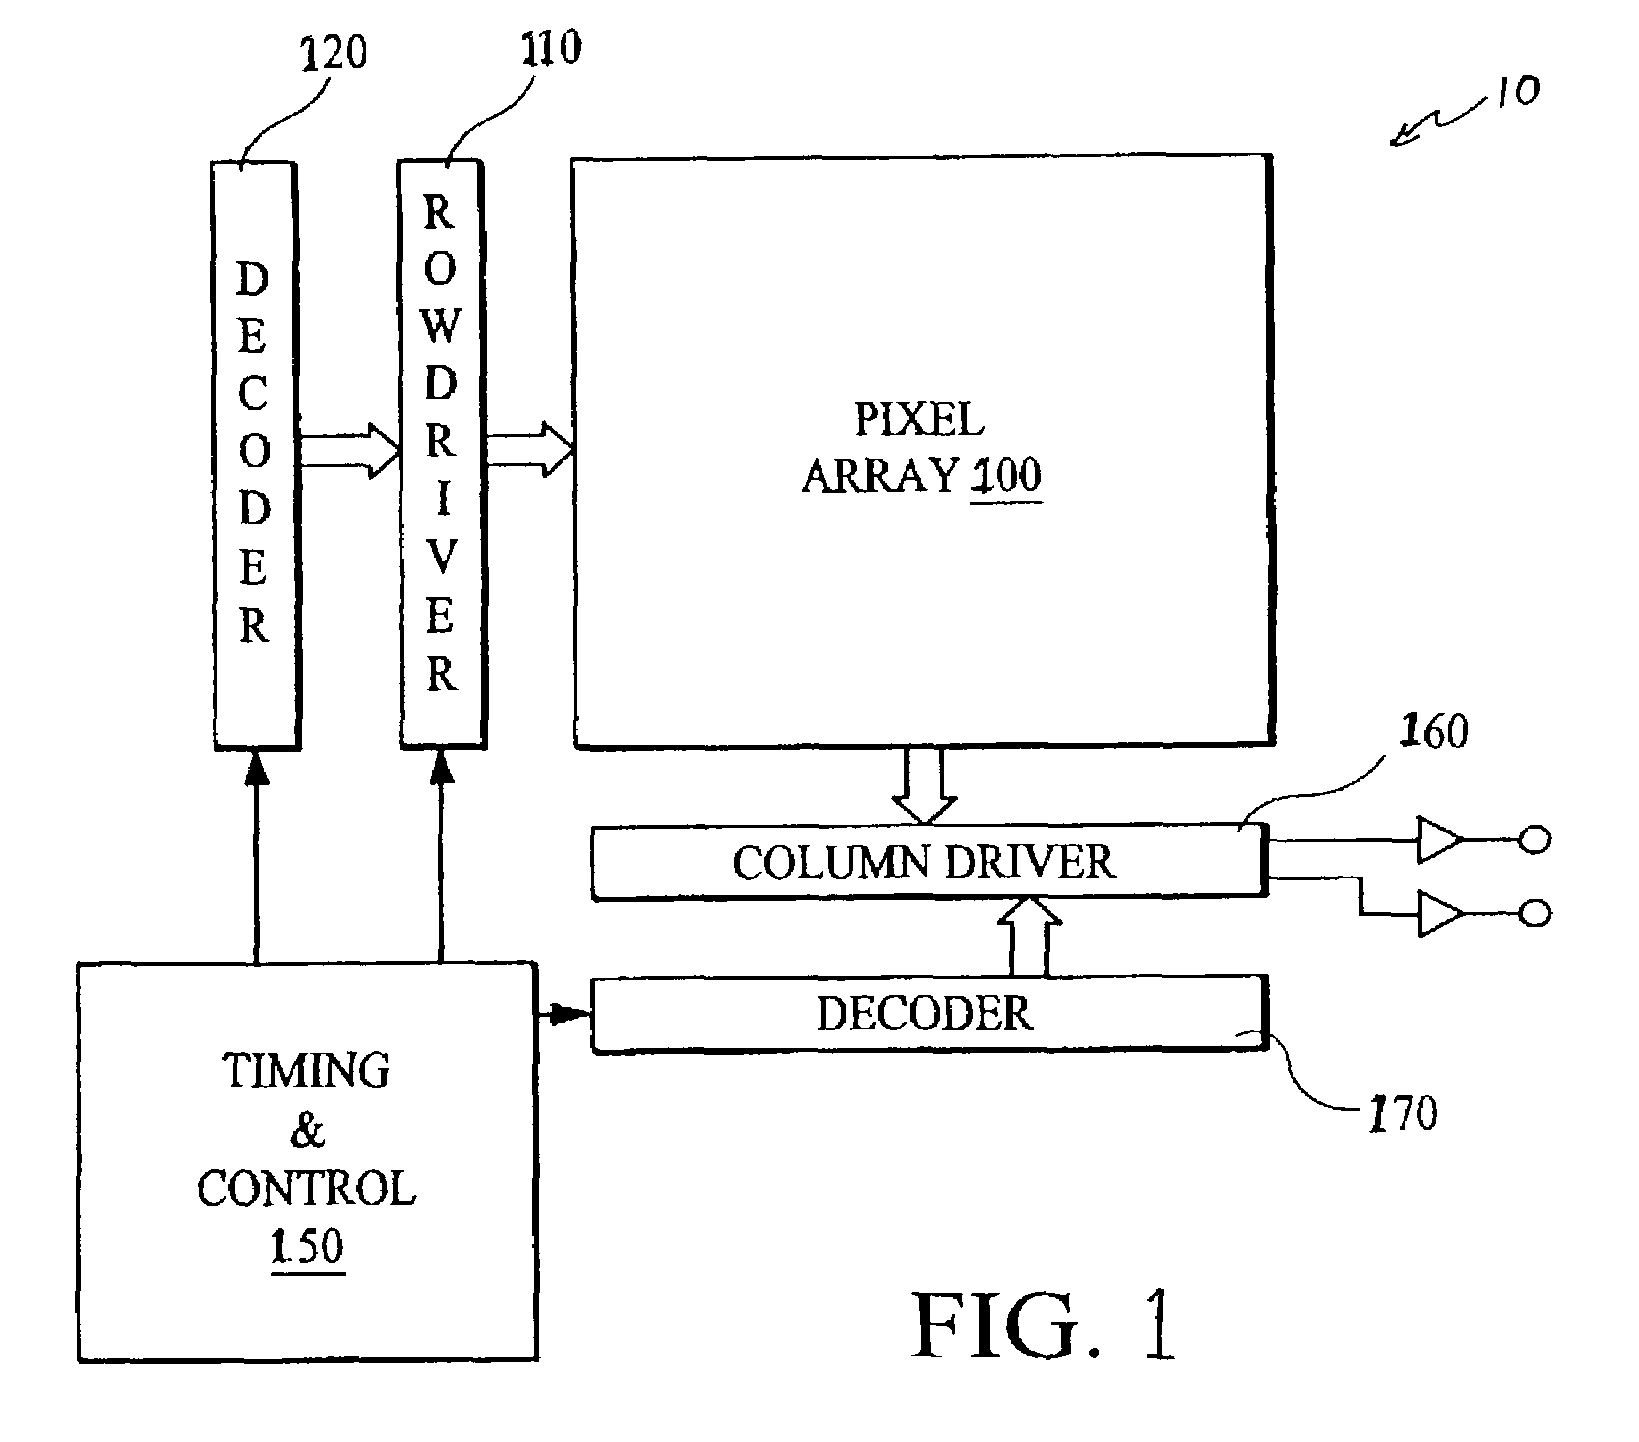 CMOS image sensor apparatus with on-chip real-time pipelined JPEG compression module